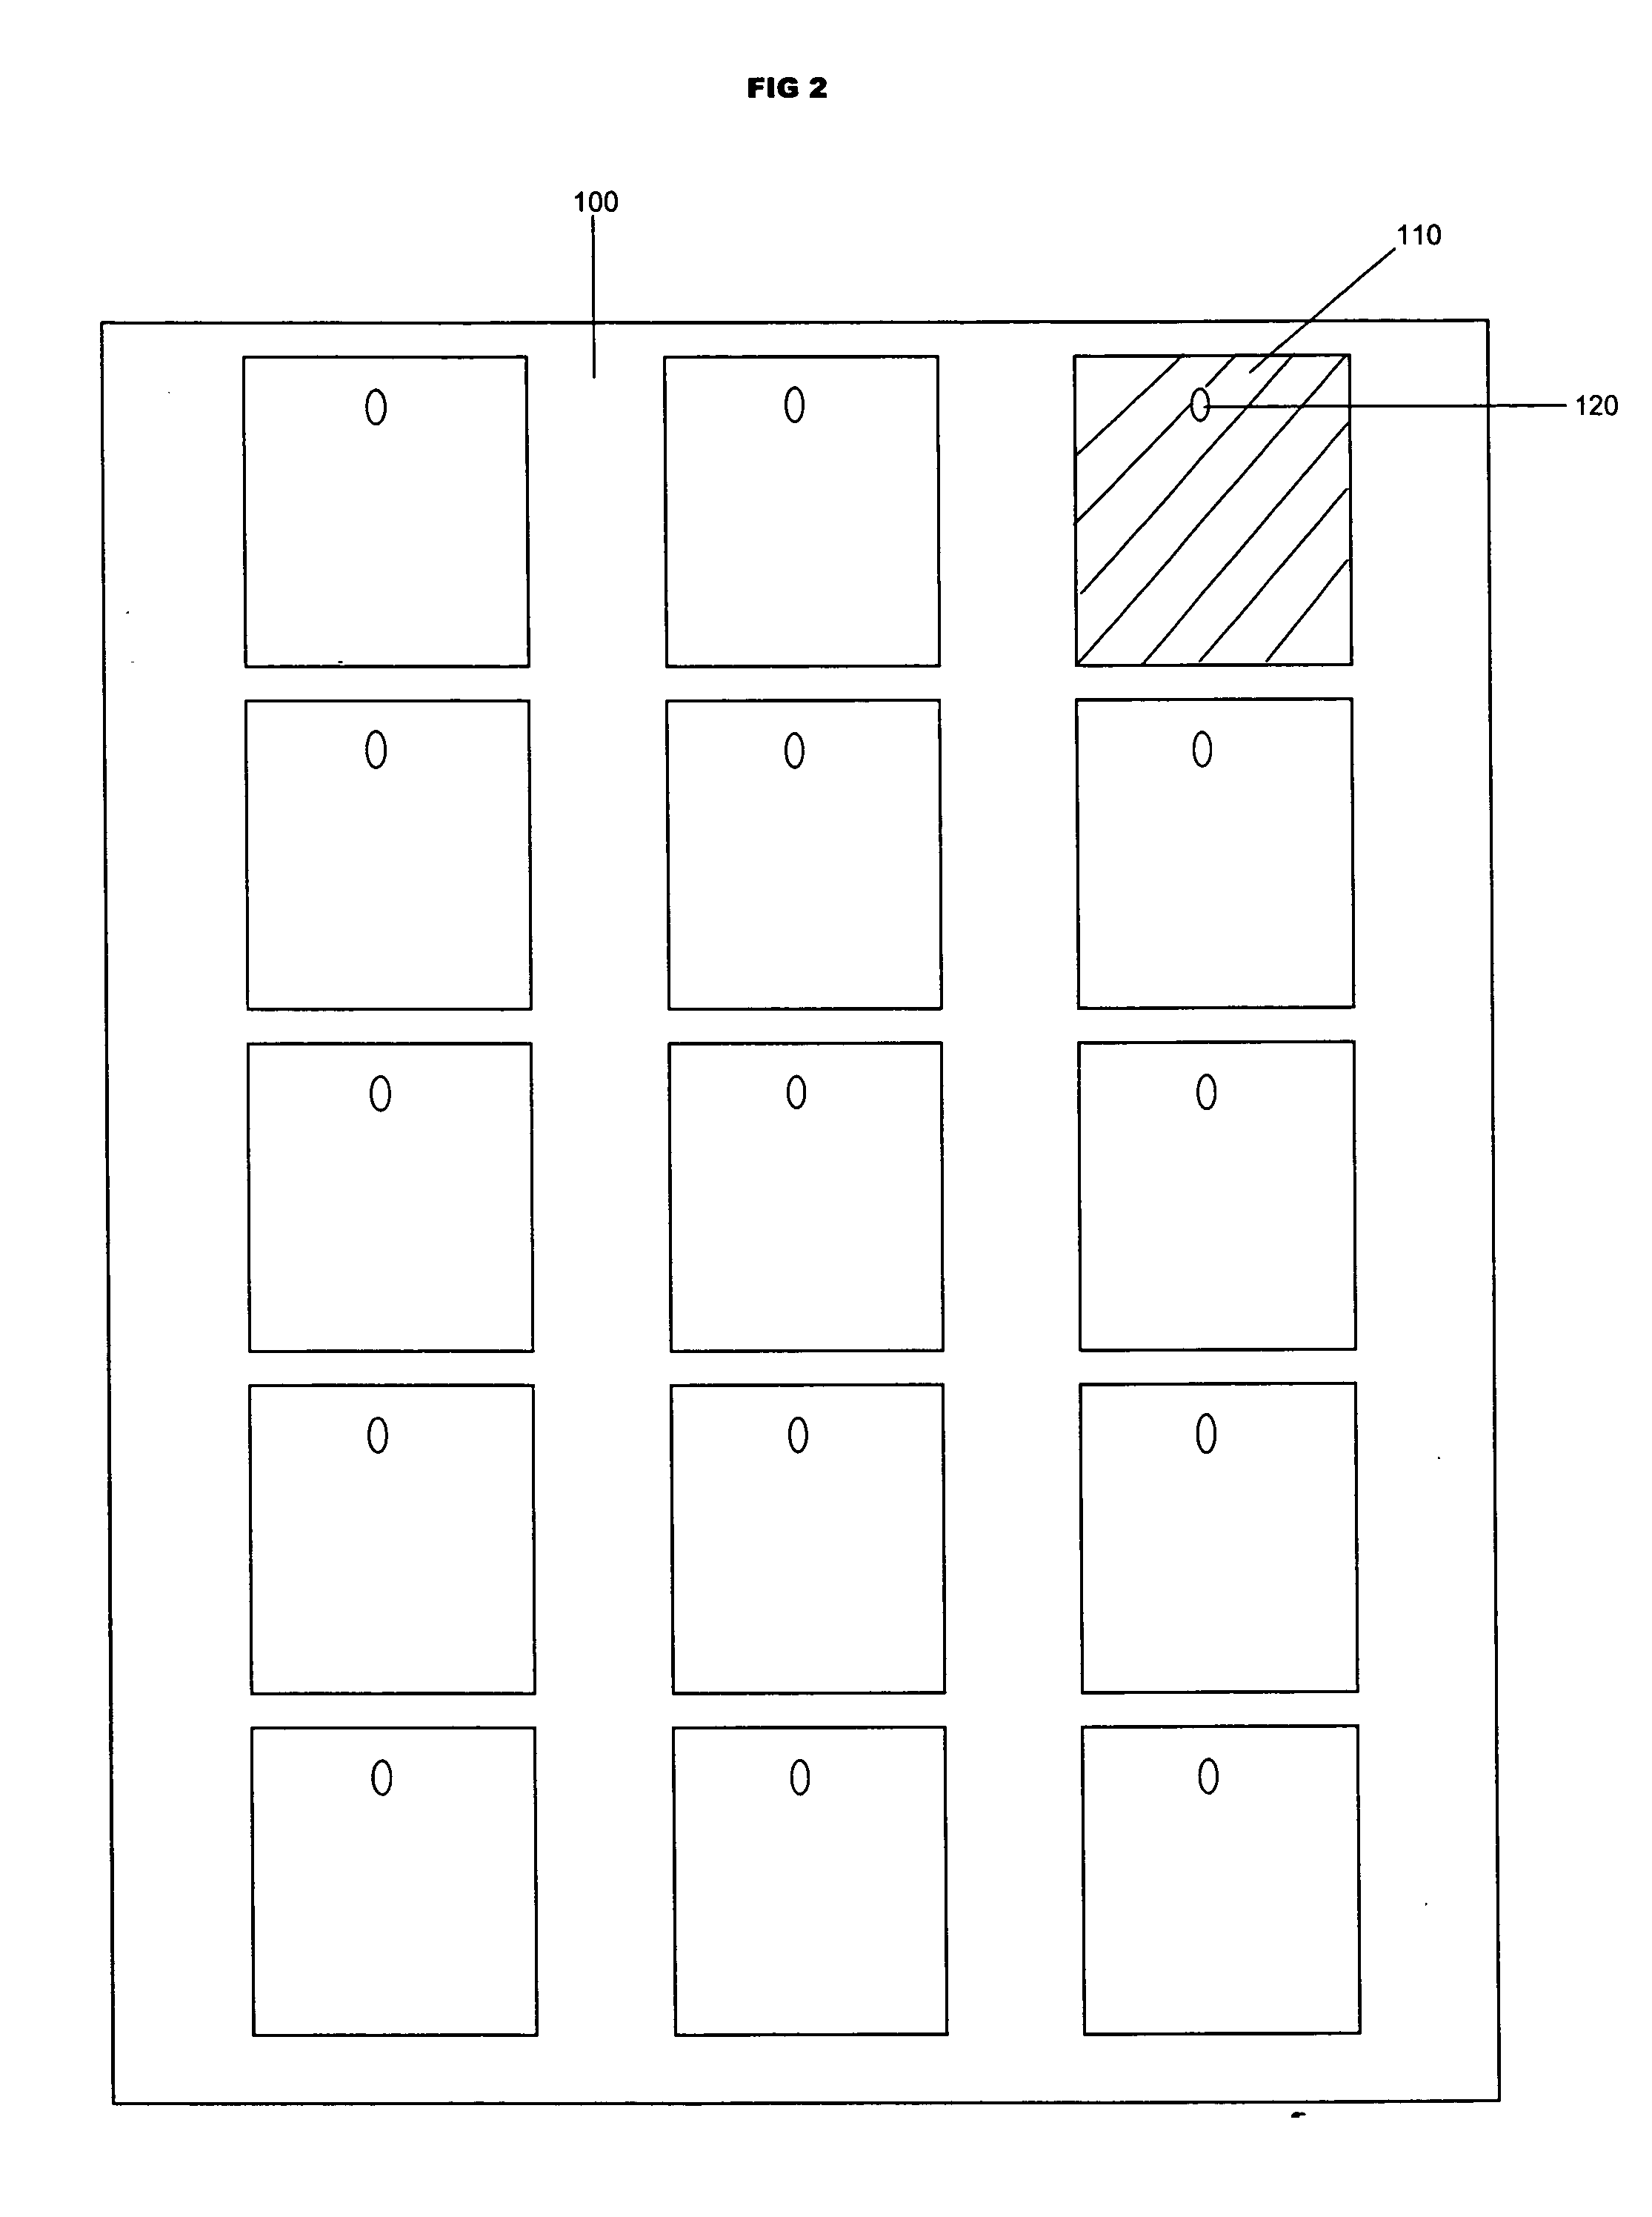 Composite form assembly with frangible bonded layers formed in-situ